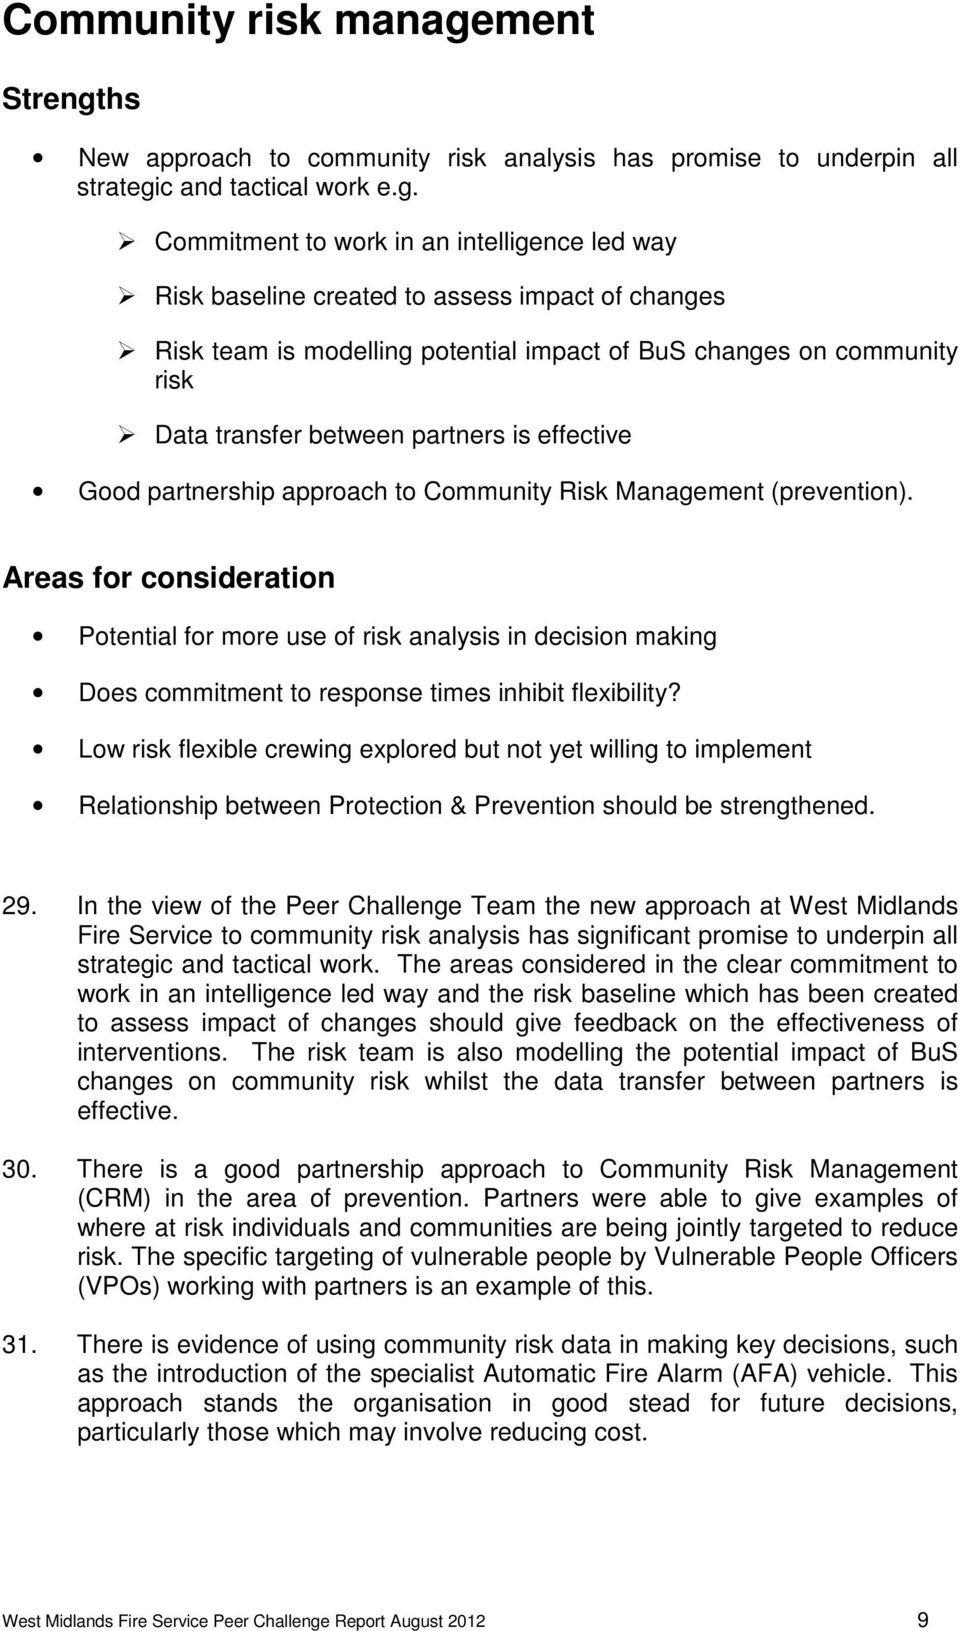 hs New approach to community risk analysis has promise to underpin all strategi